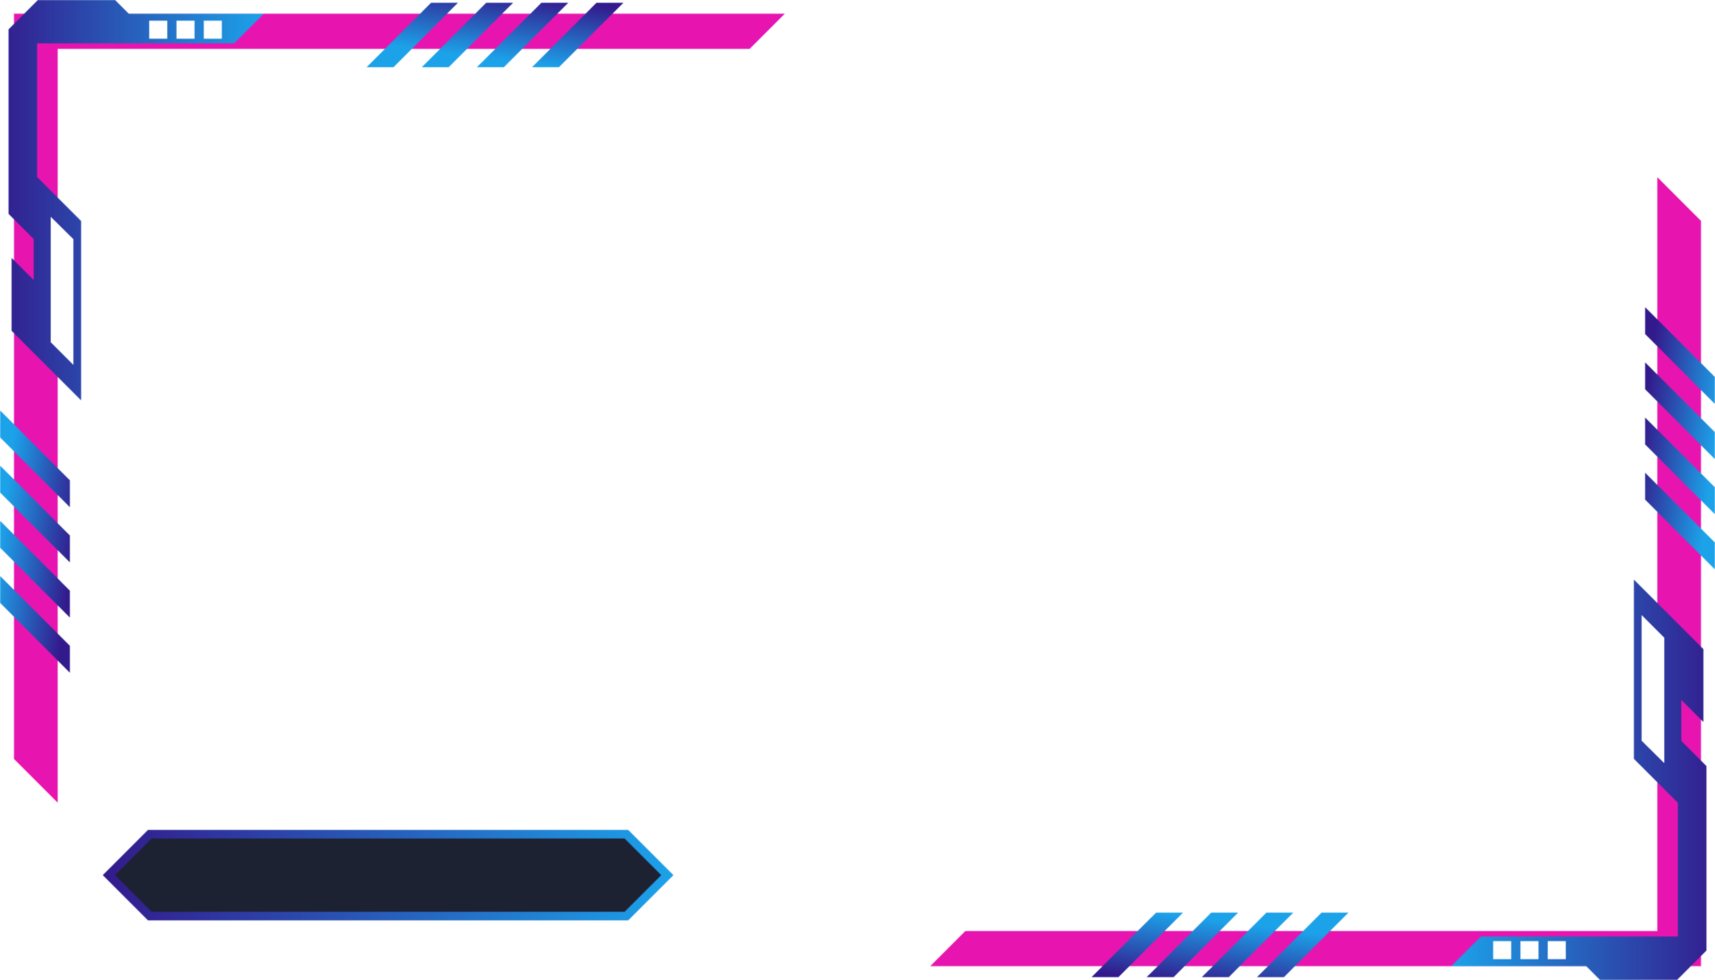 Simple futuristic gaming screen panel PNG with abstract shapes. Online game streaming overlay and user interface design with pink and blue colors. Metallic gaming overlay panel image.